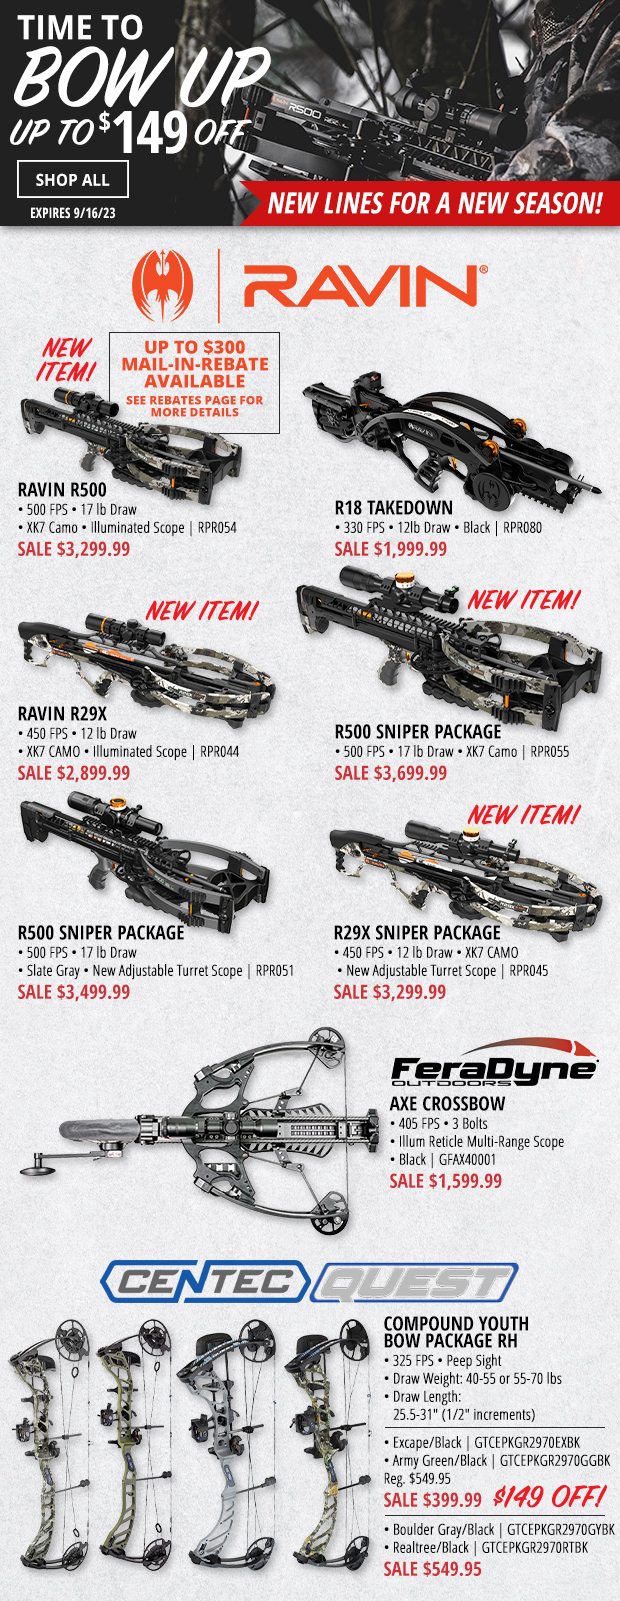 Crossbows and Bows Up to $149 Off